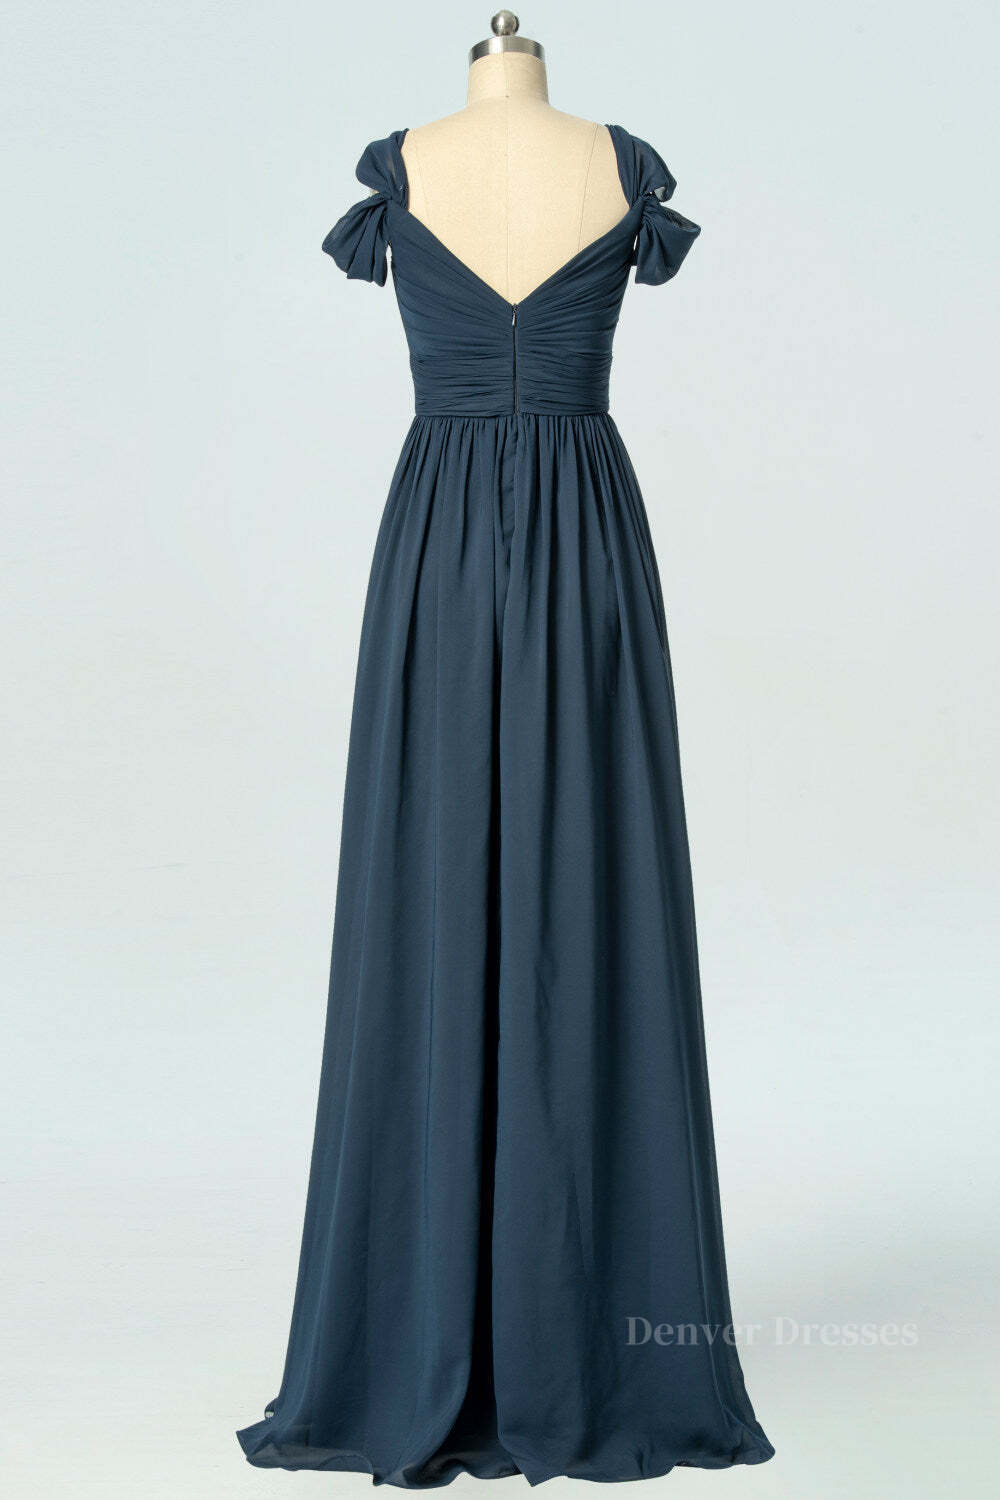 Formal Dress With Sleeve, Navy Blue A-line Chiffon Pleated Long Bridesmaid Dress